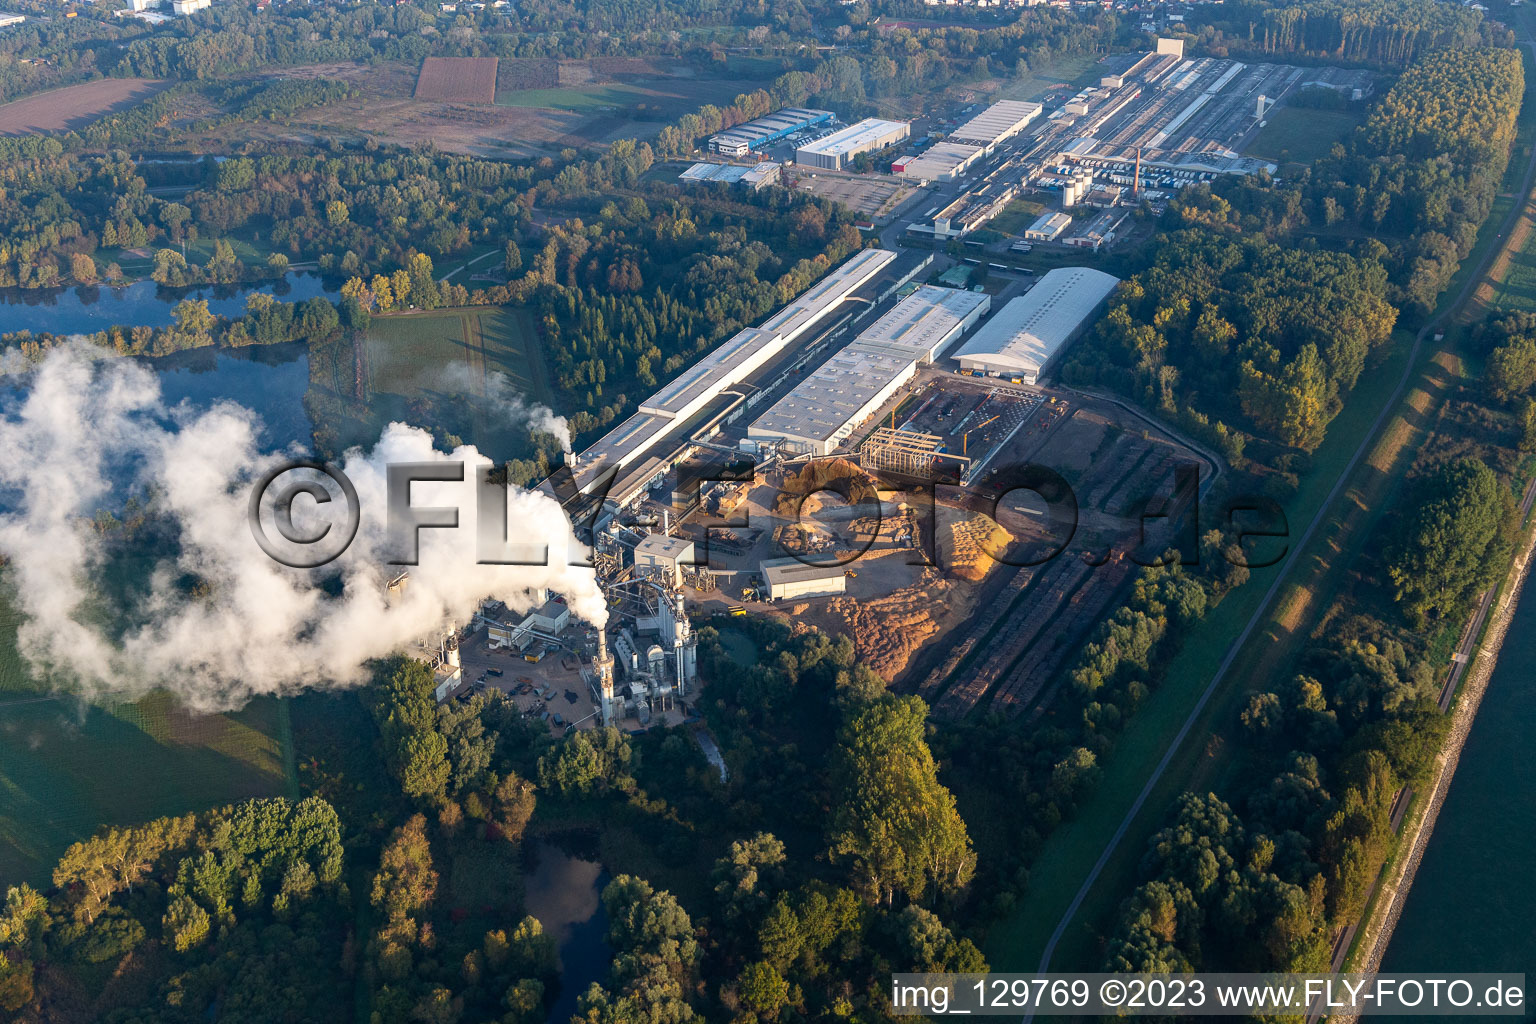 Aerial photograpy of Nolte wood material in Germersheim in the state Rhineland-Palatinate, Germany